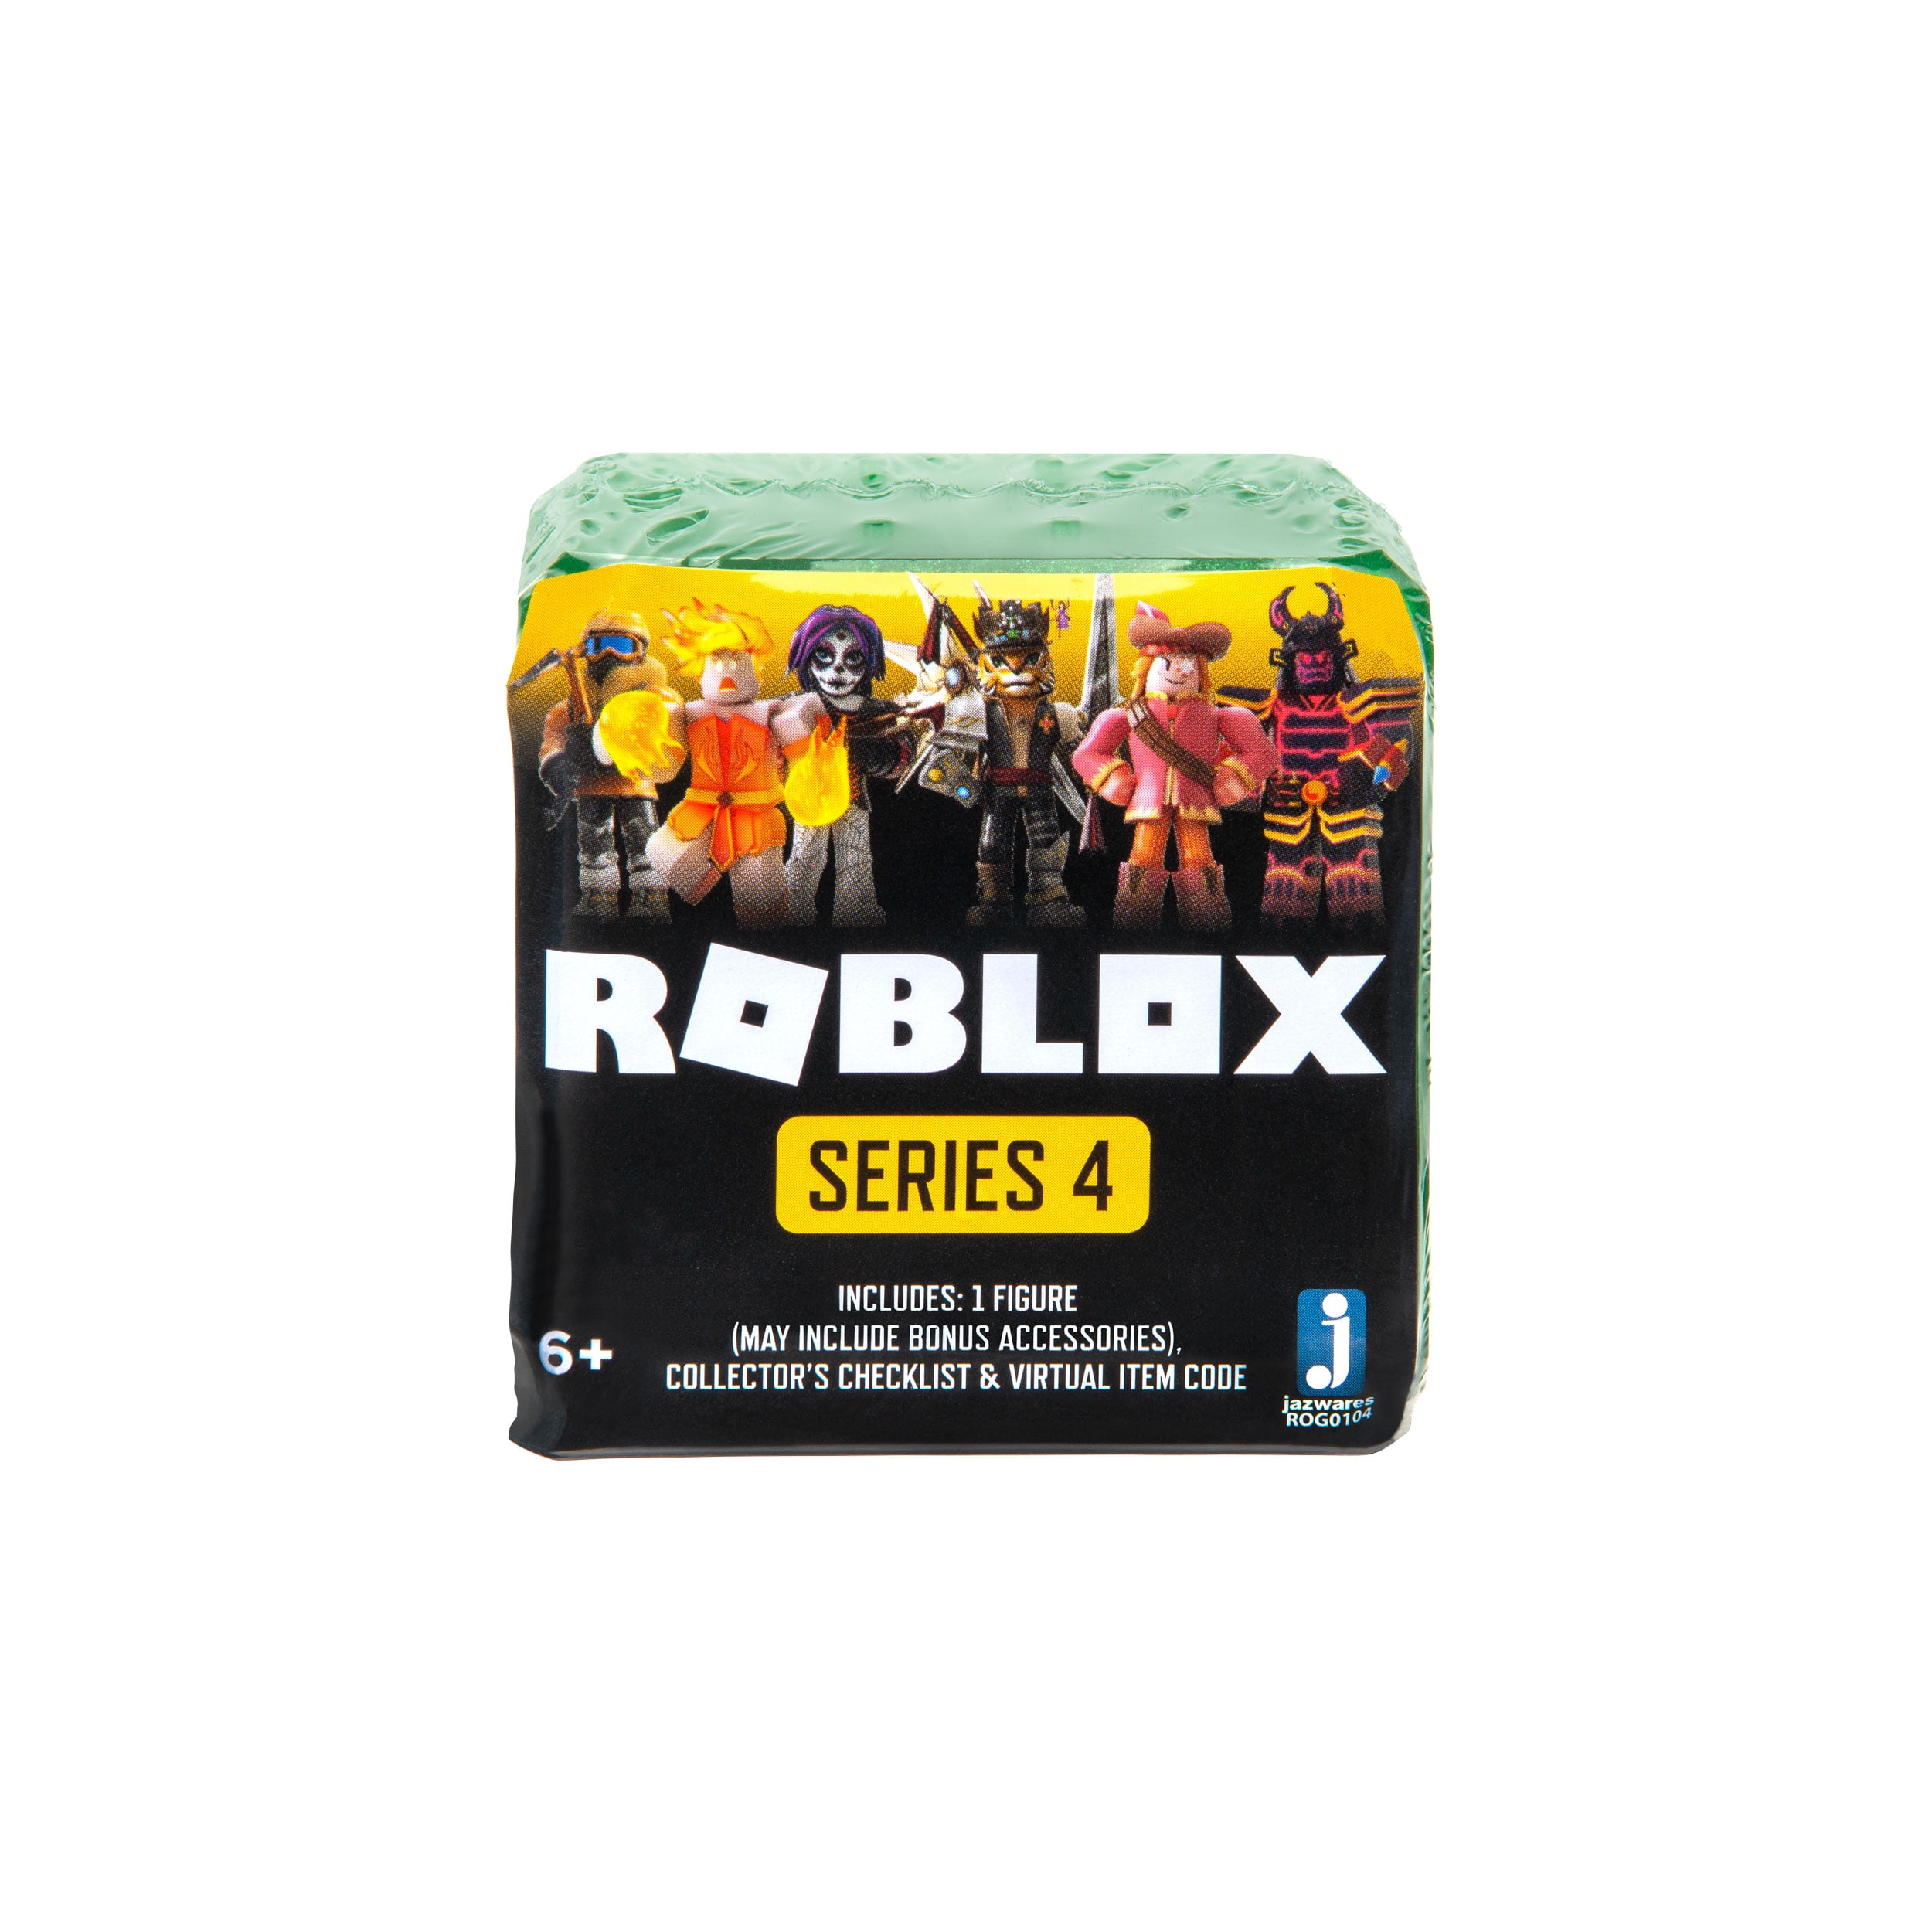 Roblox Celebrity Collection Series 4 Mystery Figure Includes 1 Figure Exclusive Virtual Item Walmart Com Walmart Com - action figures tv movie video games roblox series 4